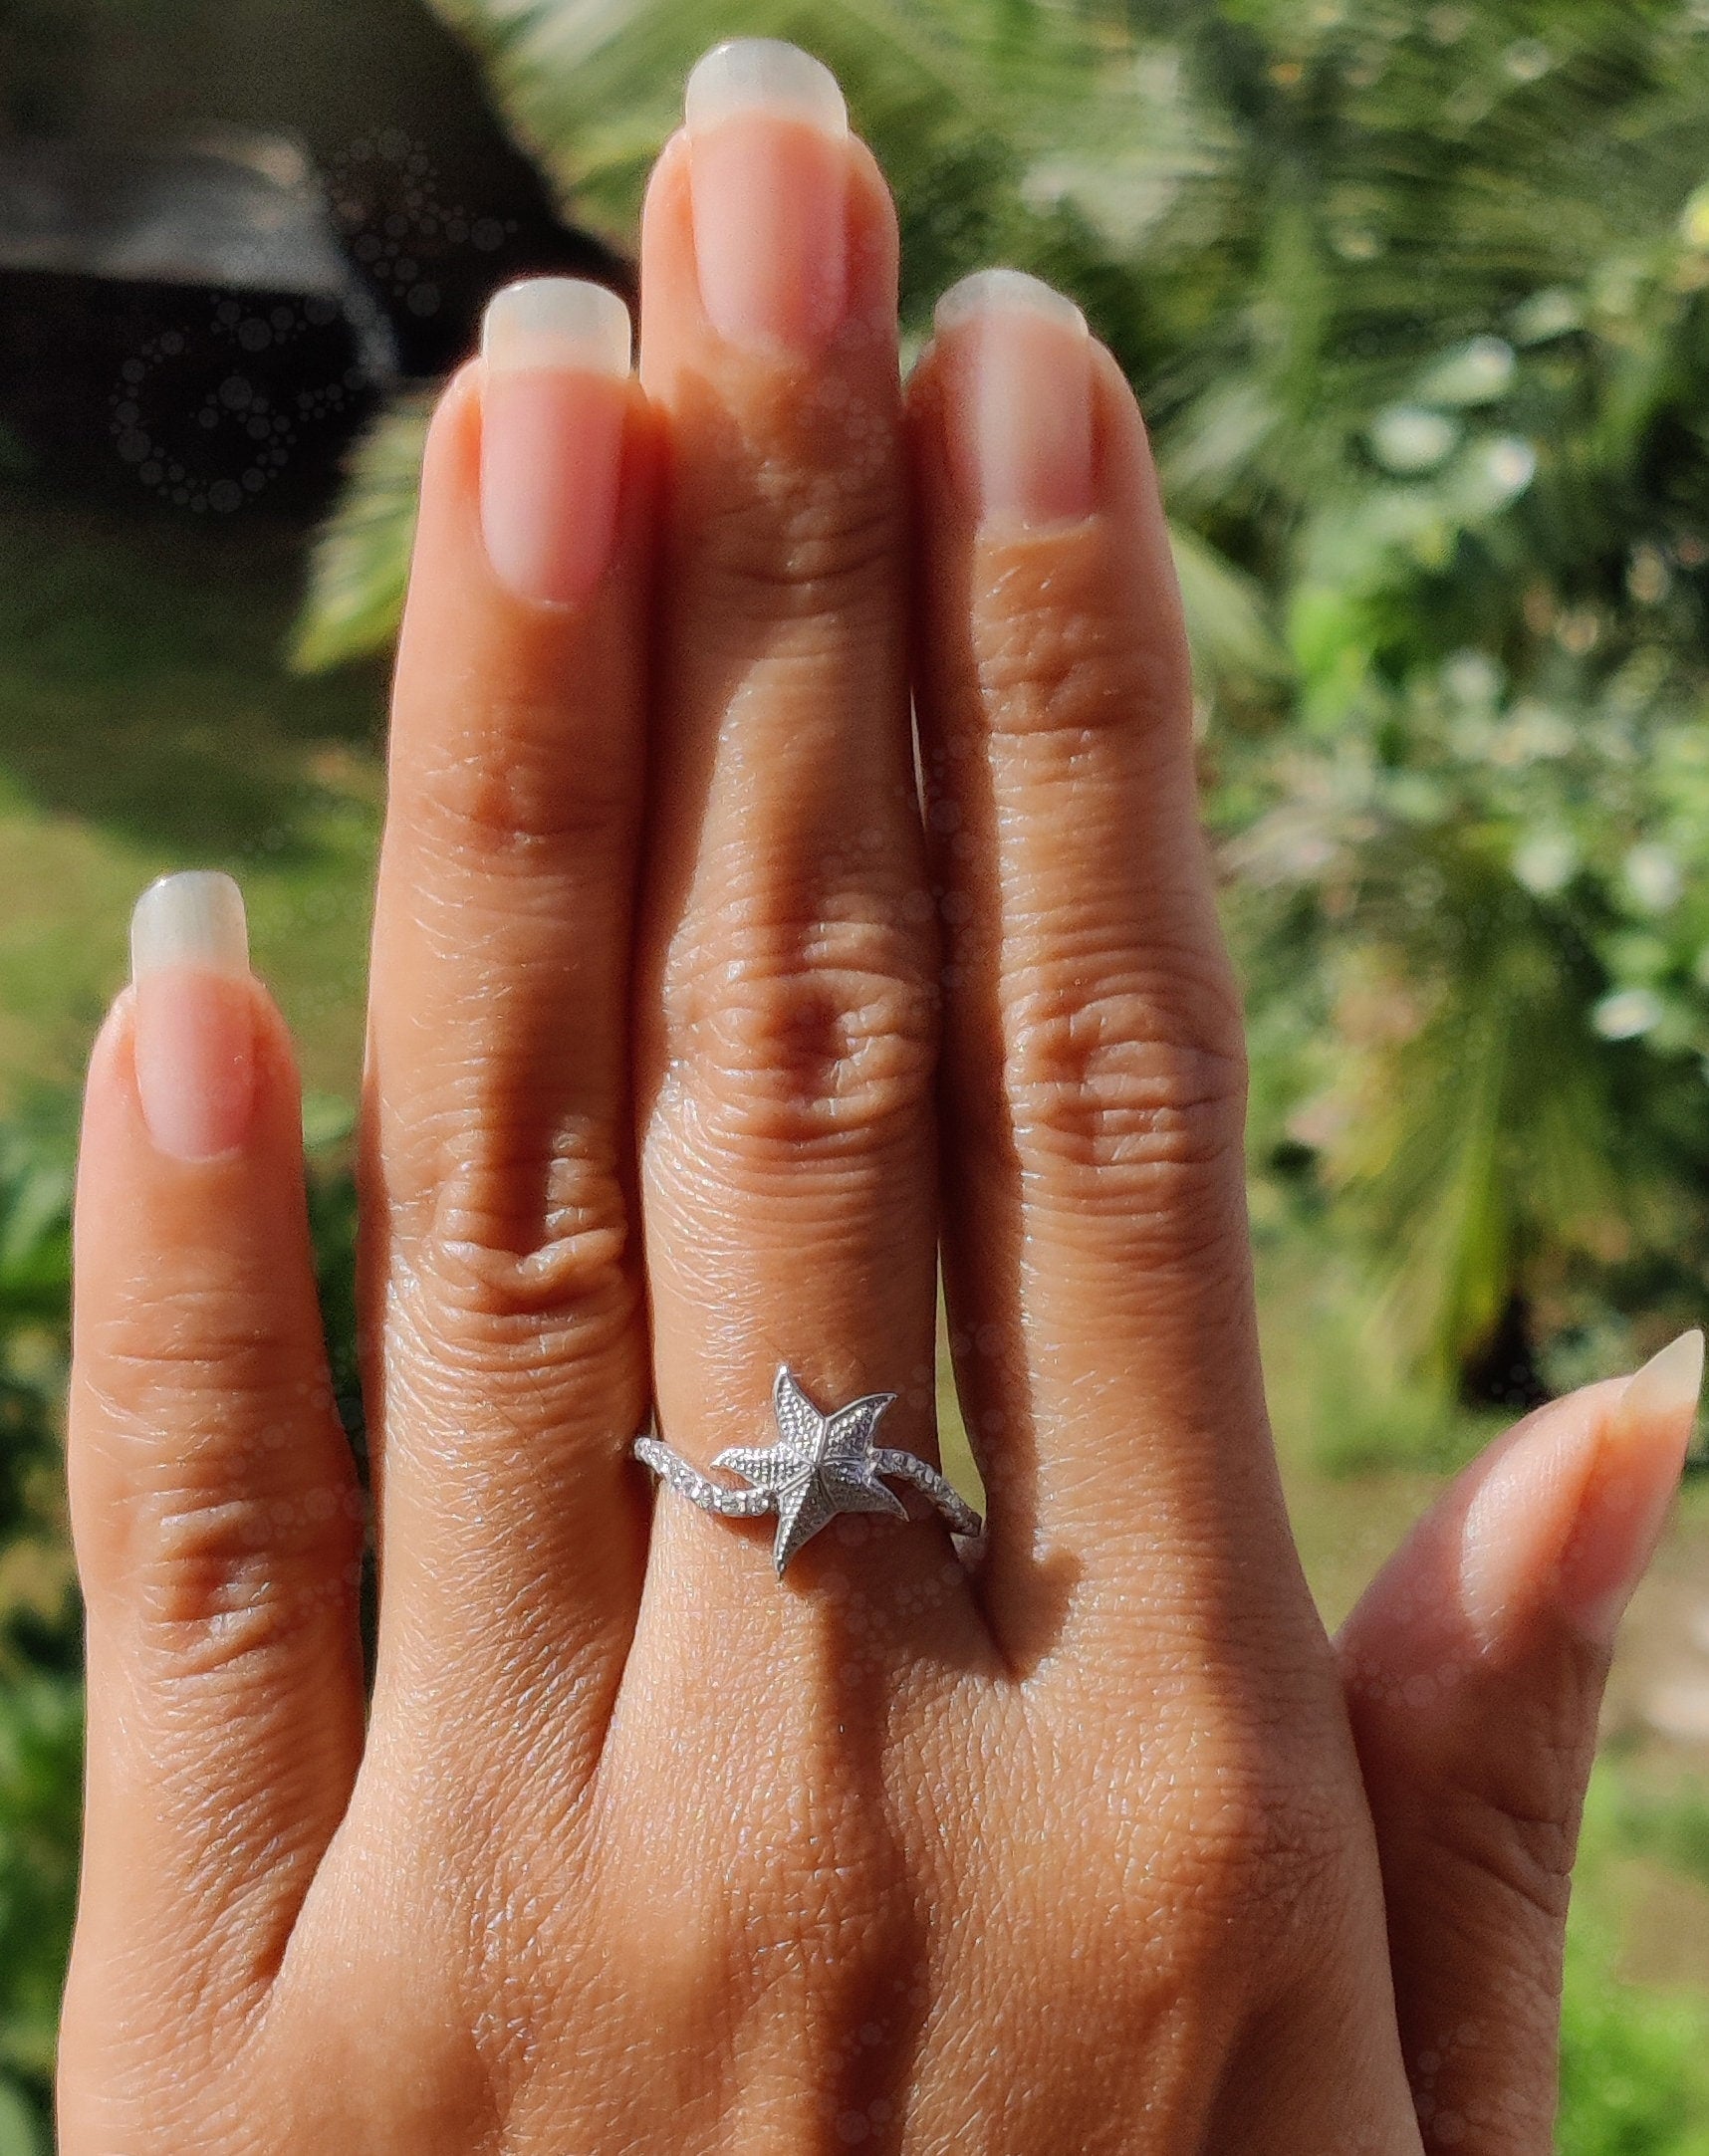 Elegant Silver and Gold Moissanite Starfish Ring - Unique Stacking Beauty Inspired by Sea Stars - Dainty Minimalist Ring for Women